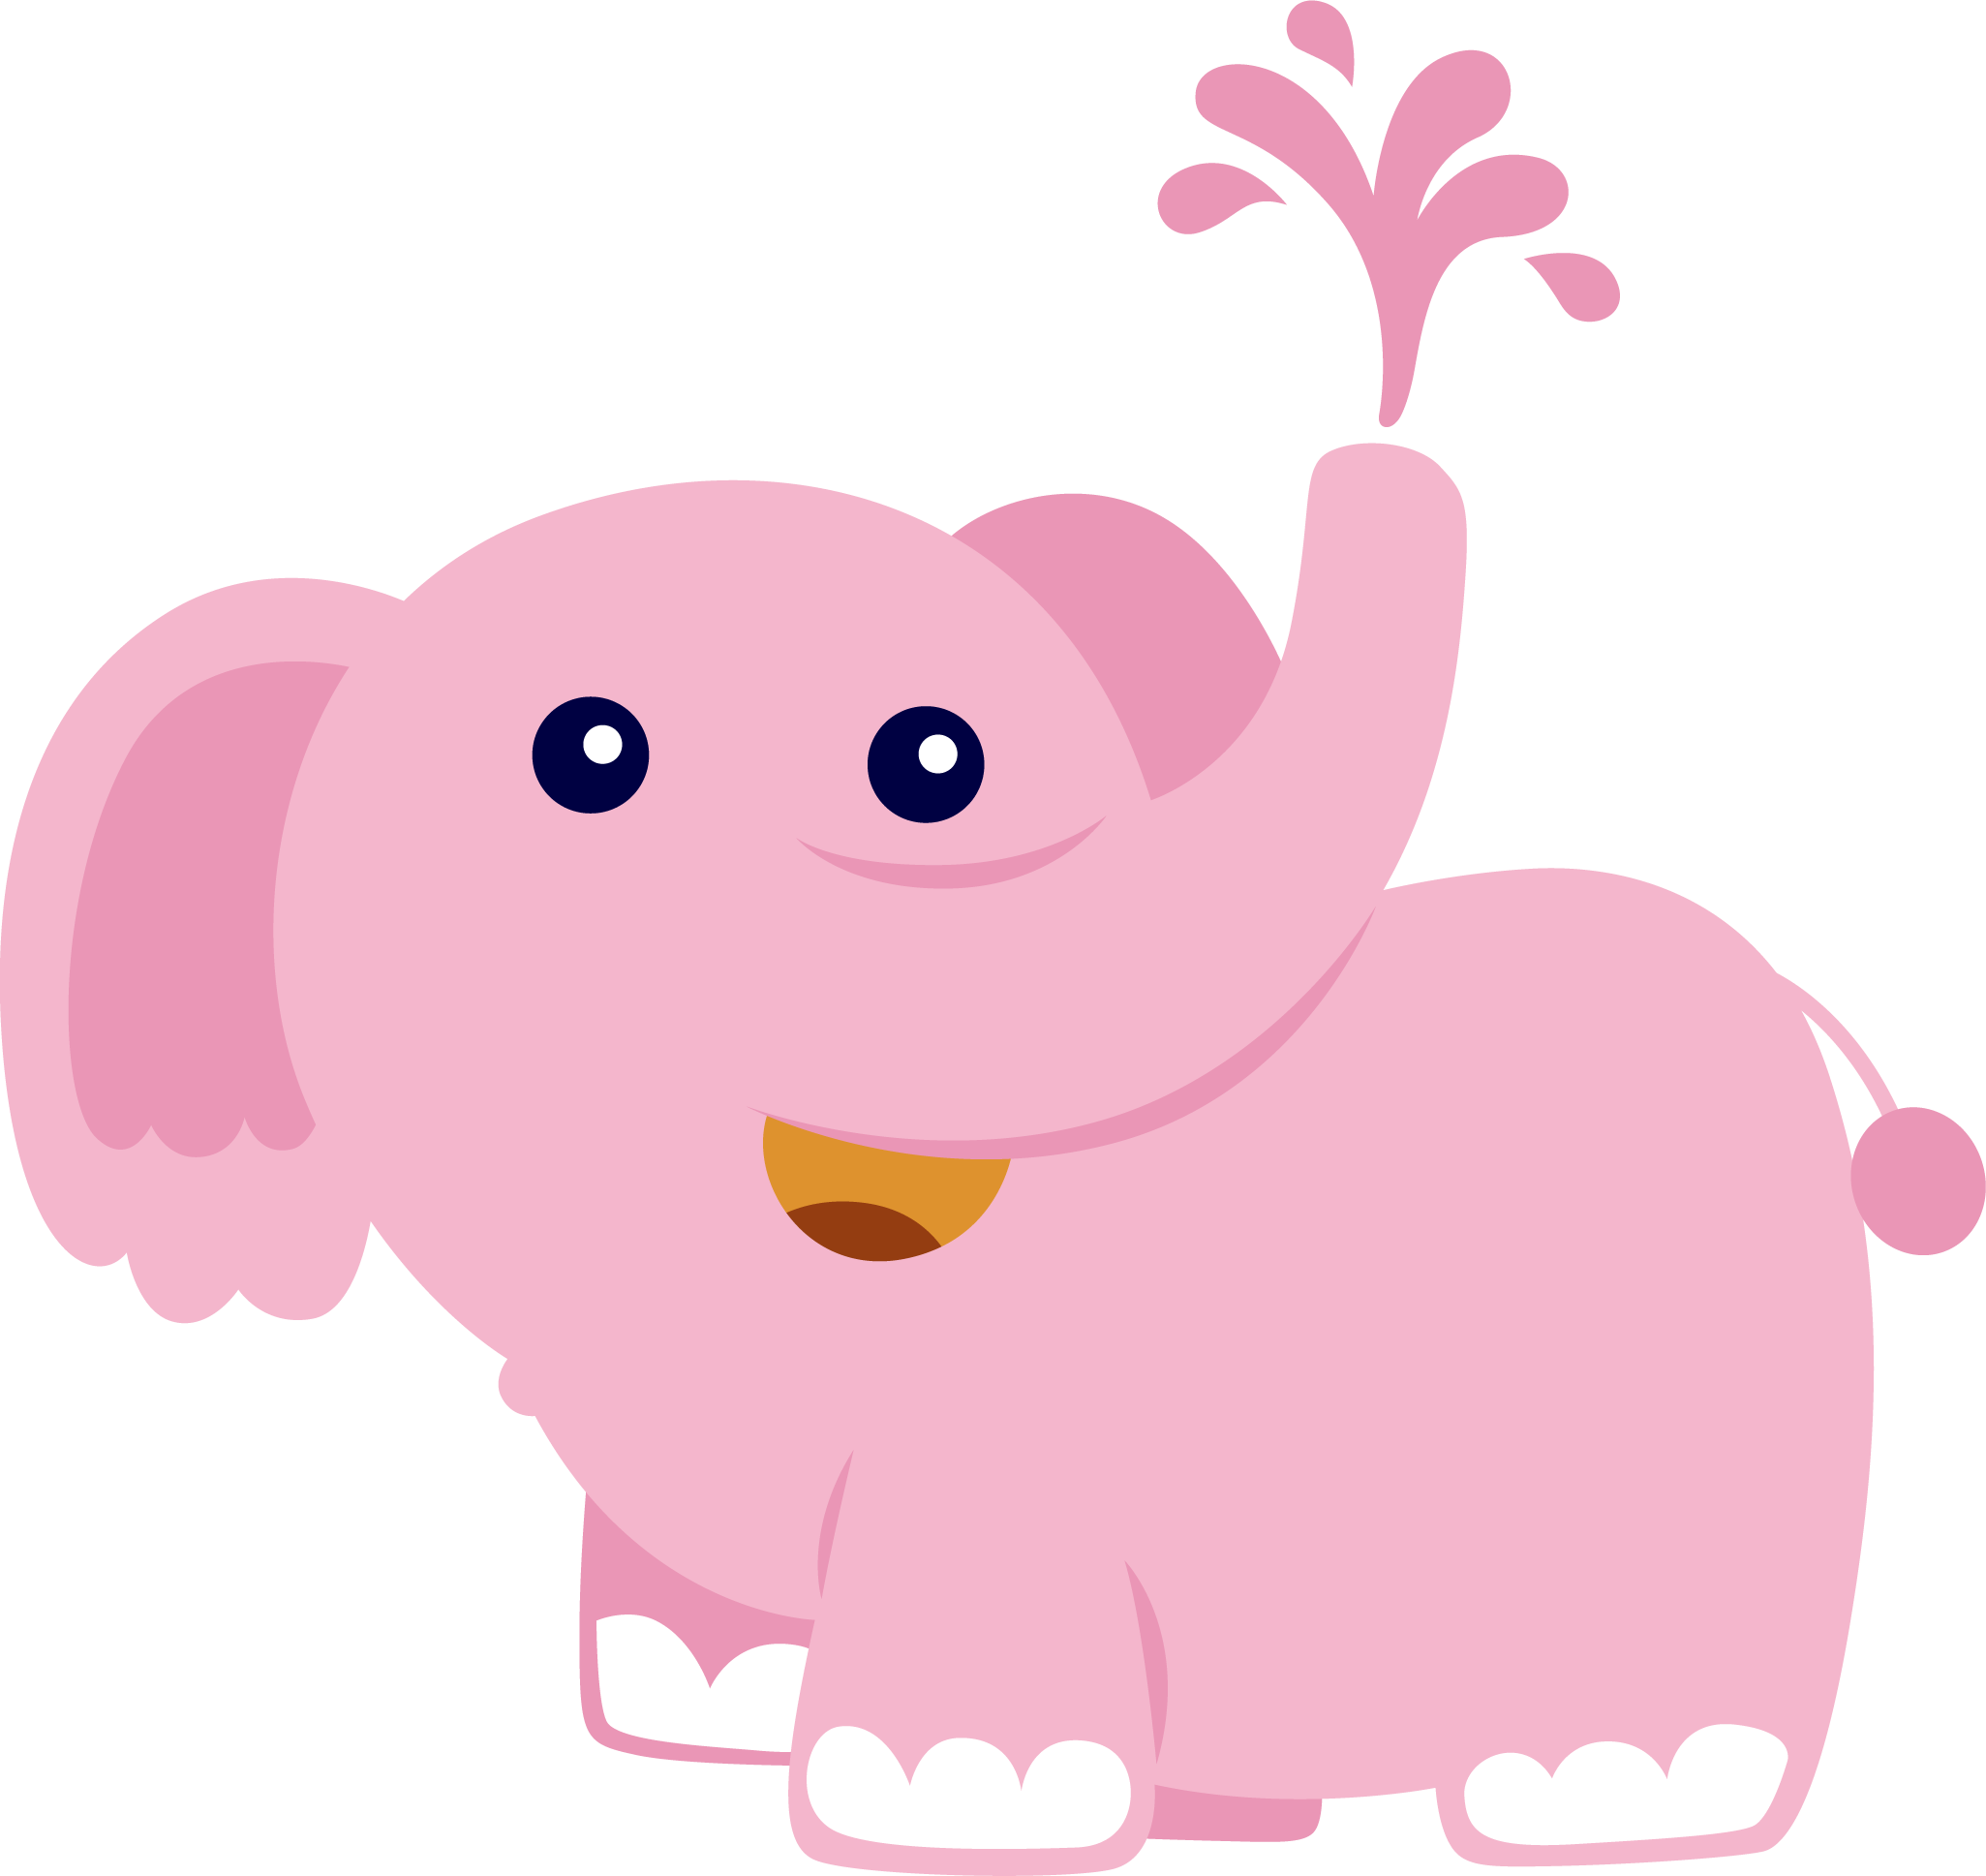 Iexdywcn nmwv png kawaii. Coral clipart elephant